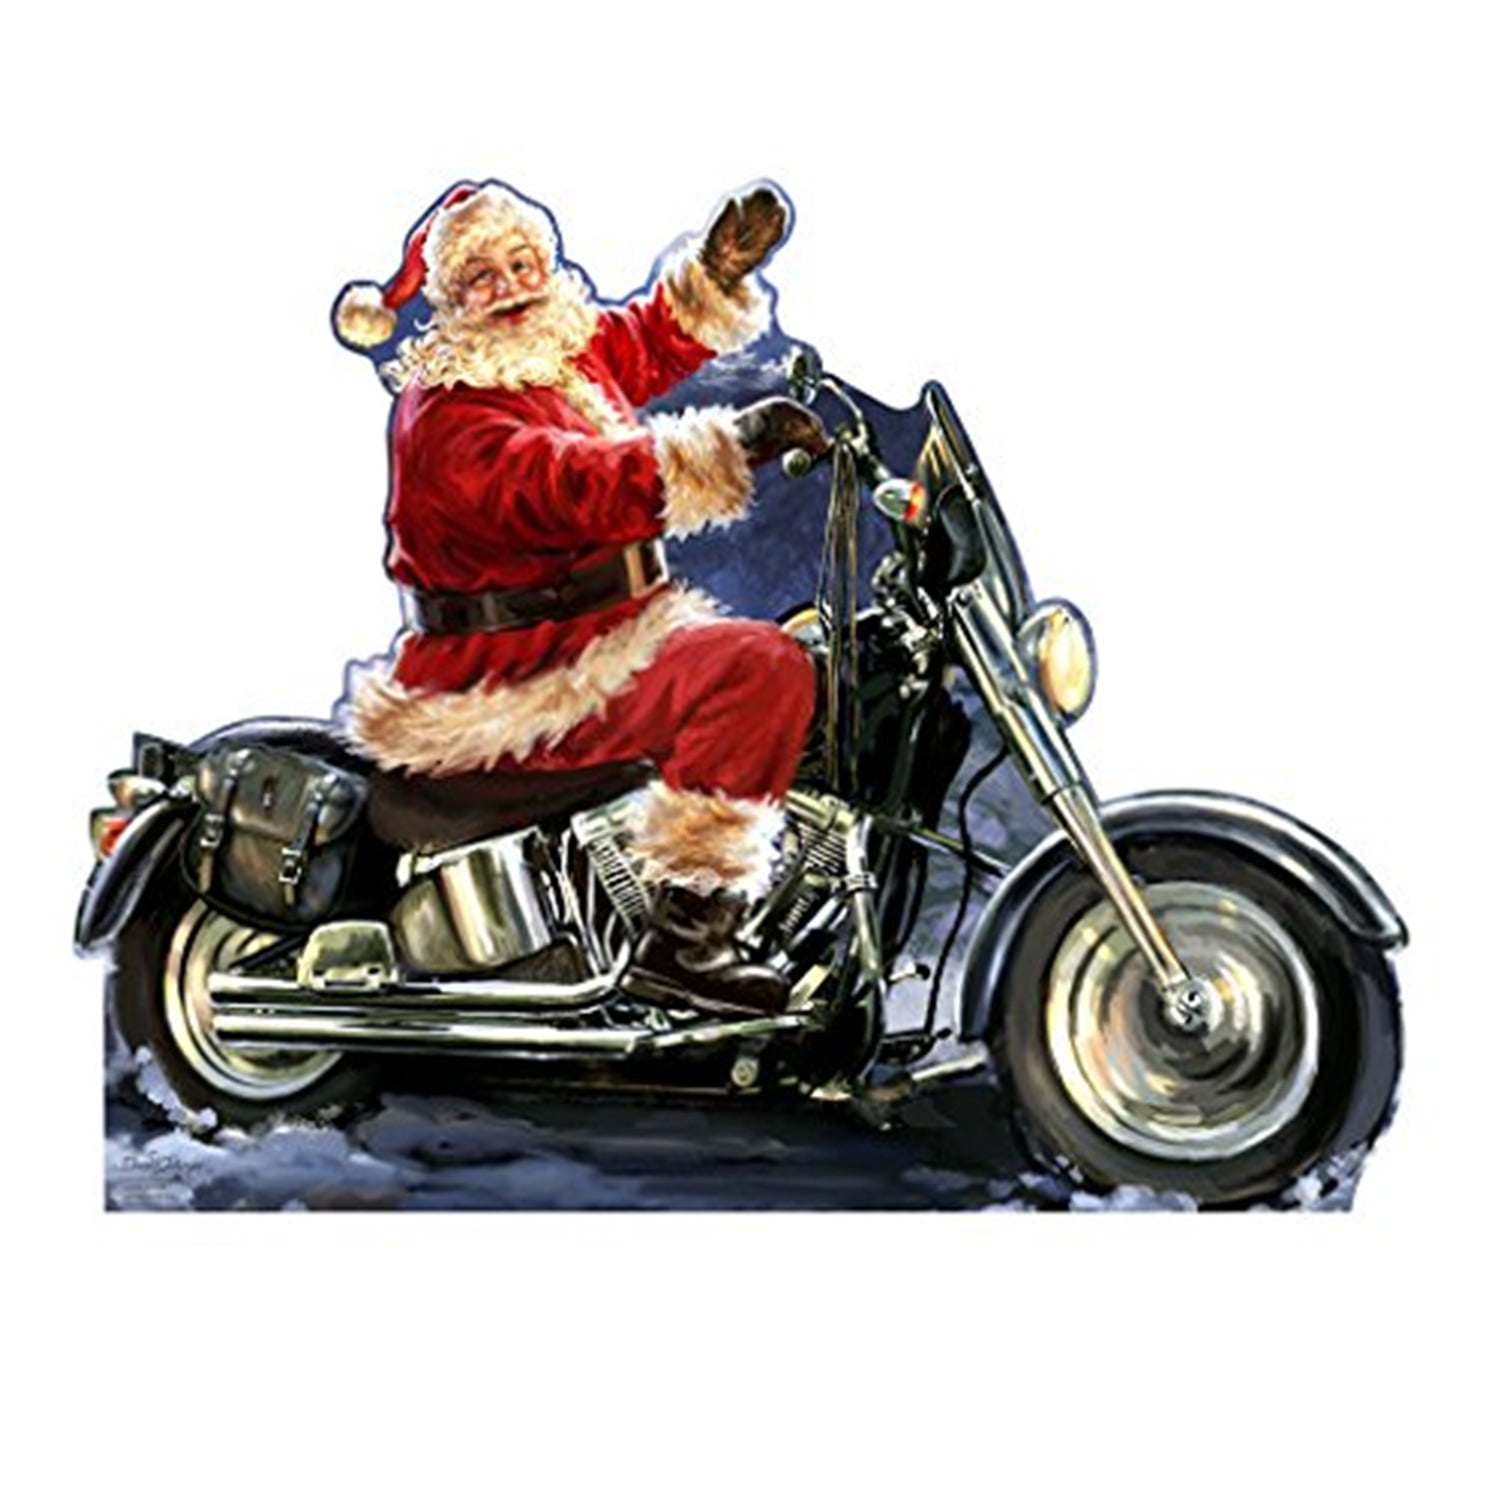 Picture of Advanced Graphics 2114 45 x 59 in. Santa Motorcycle - Dona Gelsinger Art Cardboard Standup